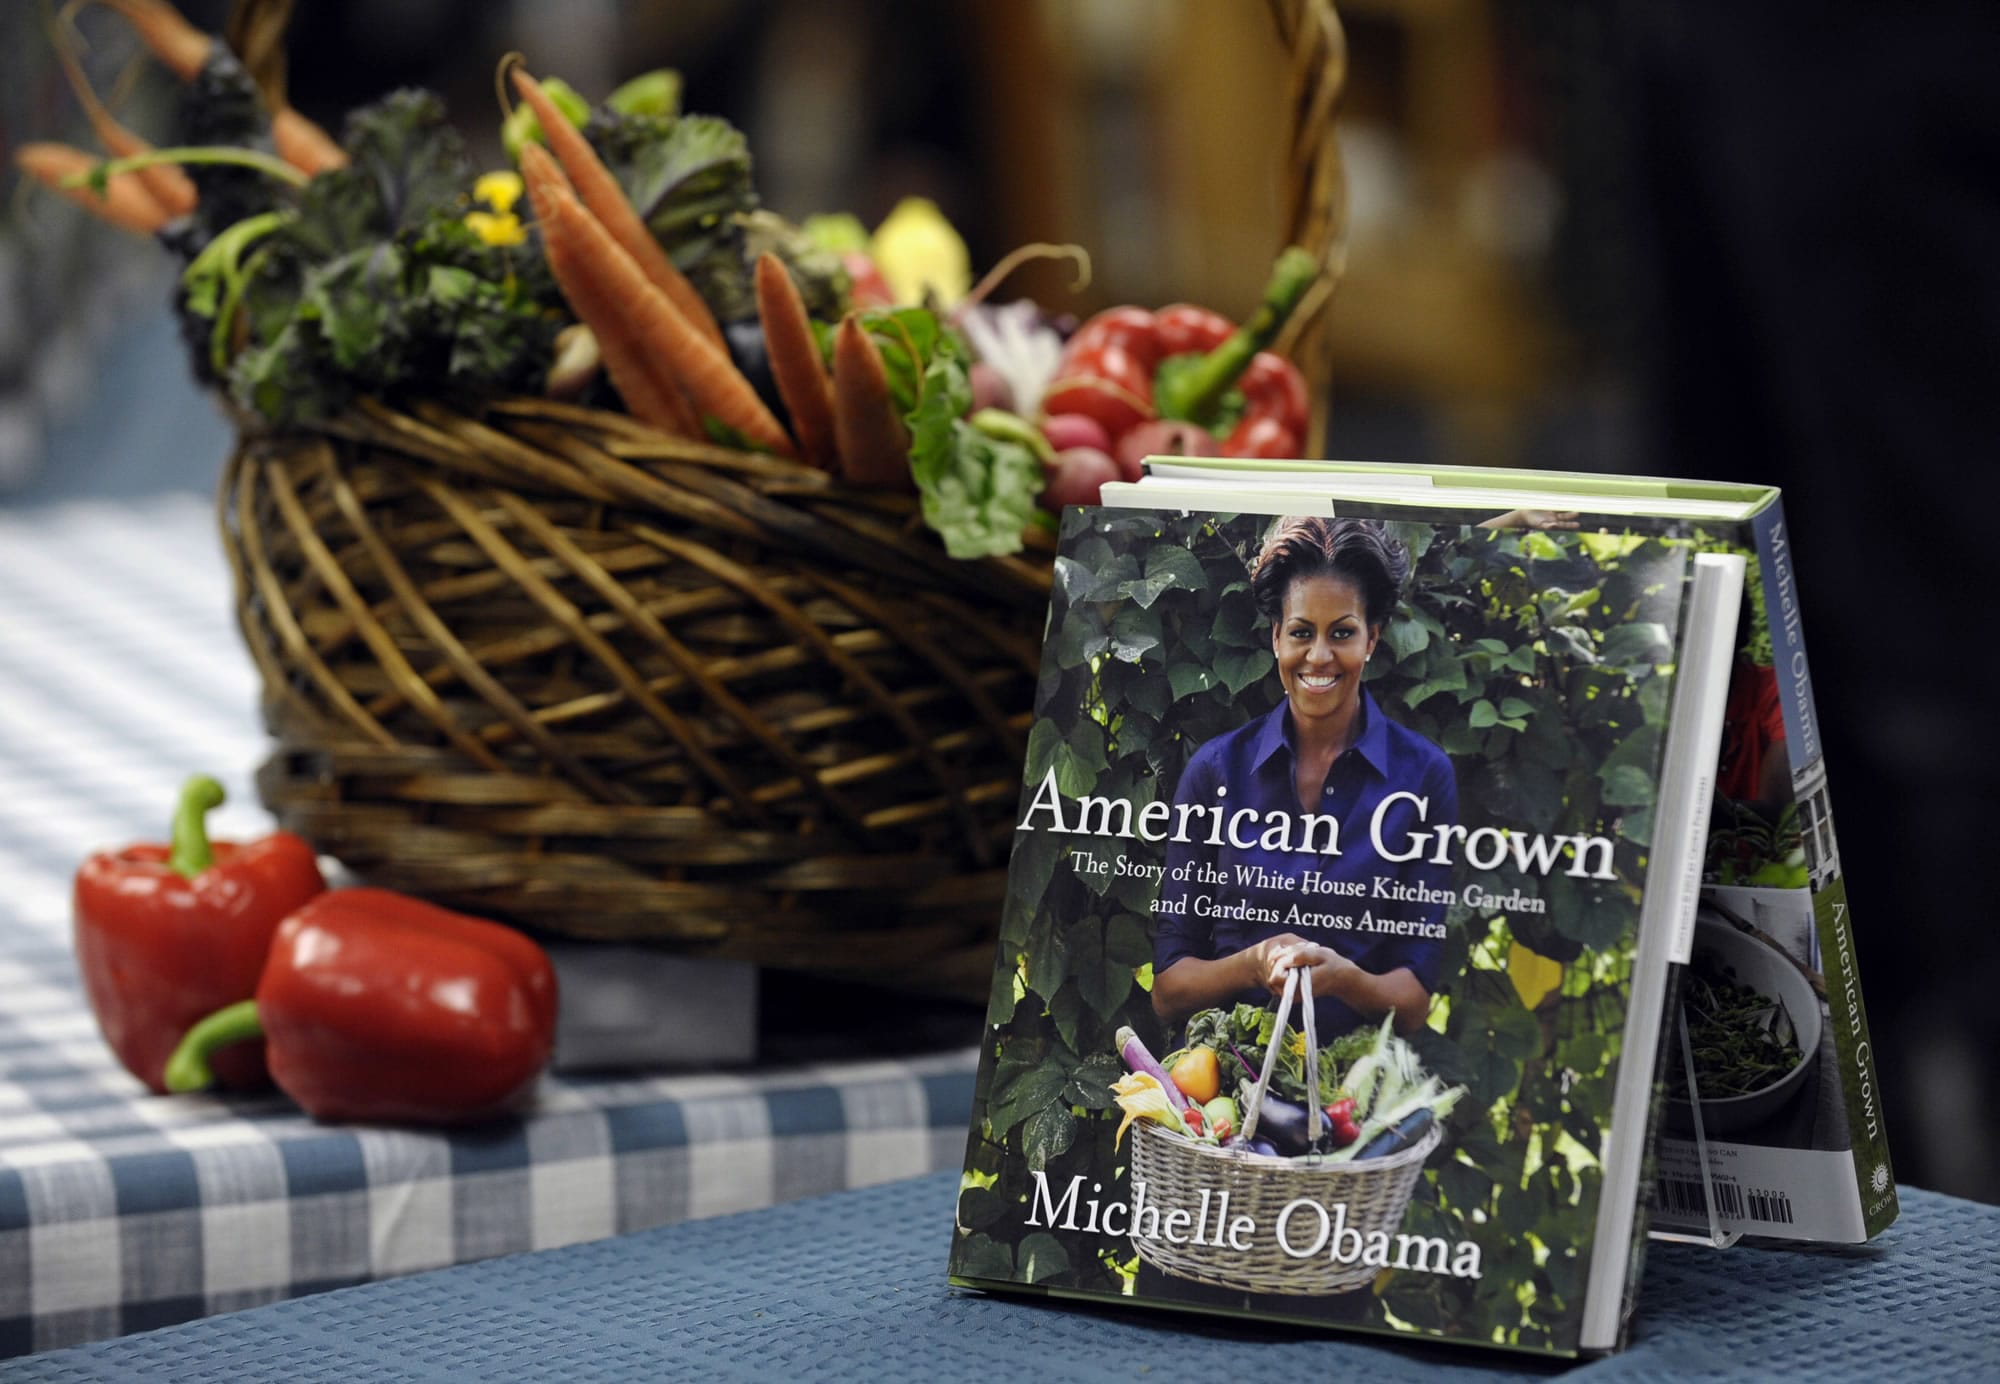 Copies of the book by first lady Michelle Obama &quot;American Grown: The Story of the White House Kitchen Garden and Garden Across America,&quot; displayed at the Politics &amp; Prose bookstore in Washington.